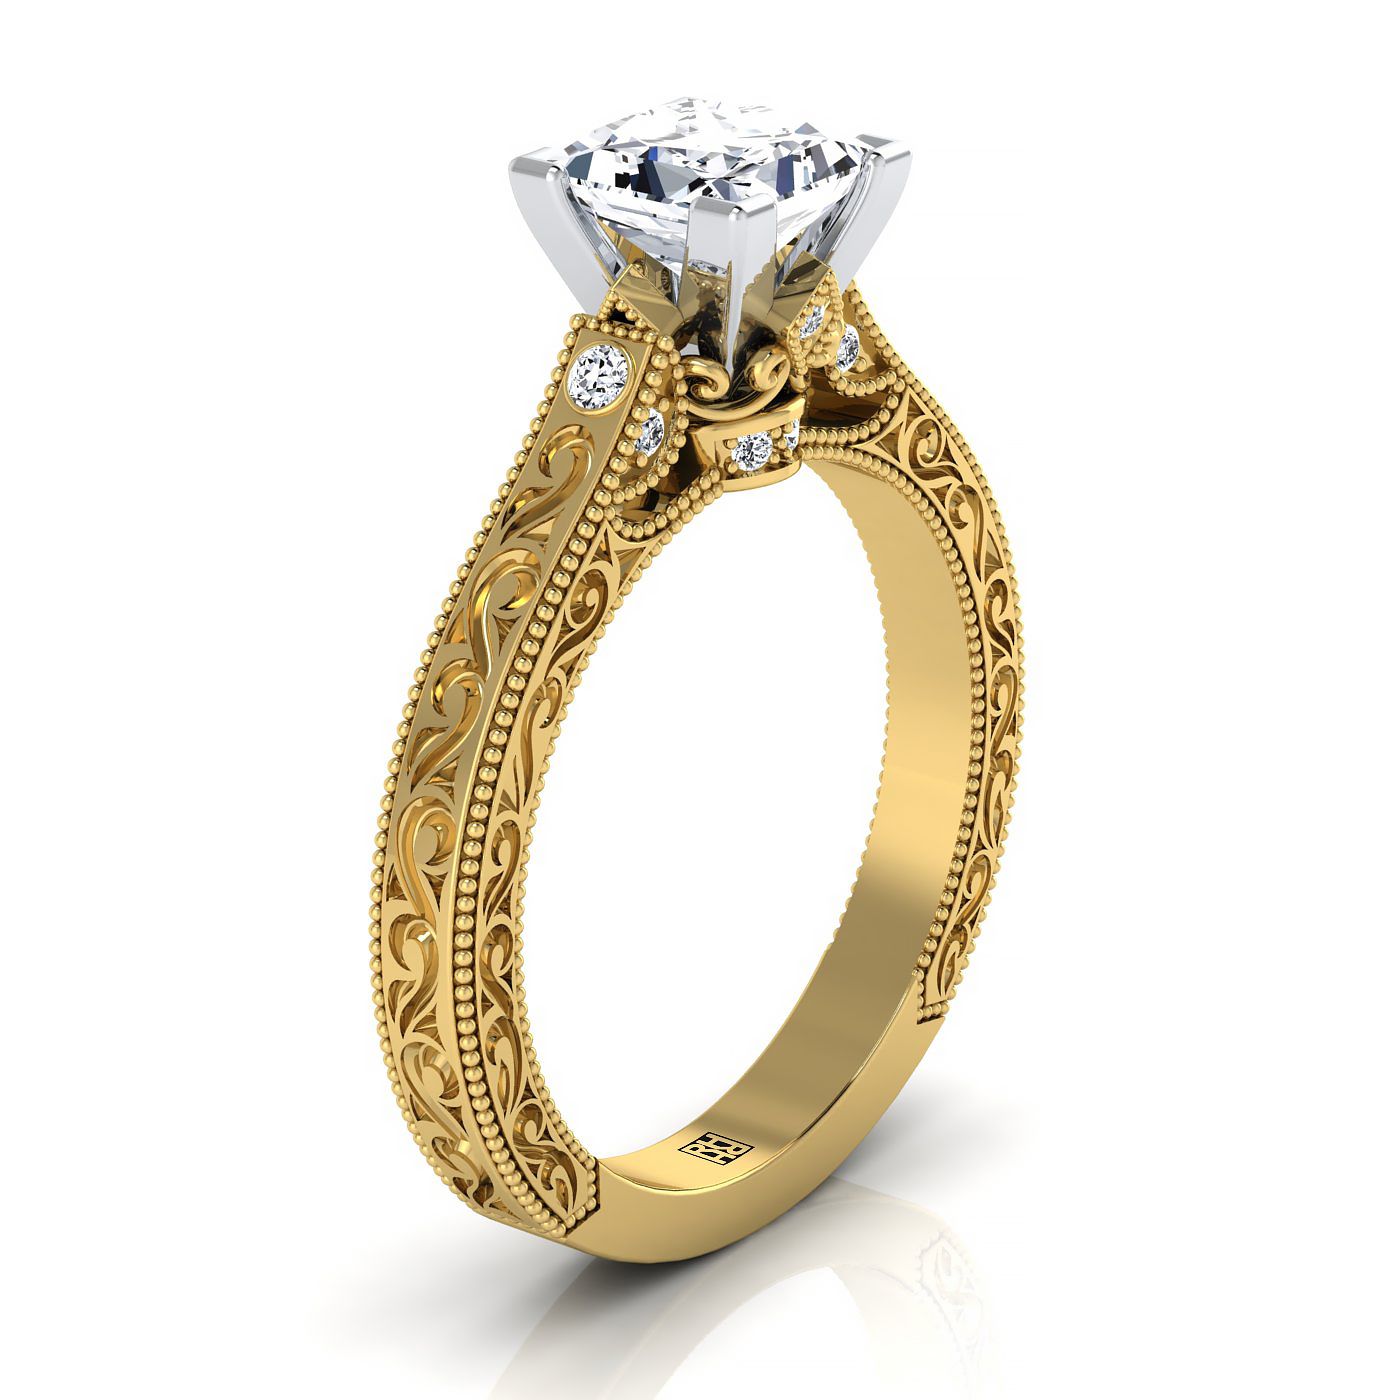 18K Yellow Gold Princess Cut Delicate Diamond Accented Antique Hand Engraved Engagement Ring -1/10ctw